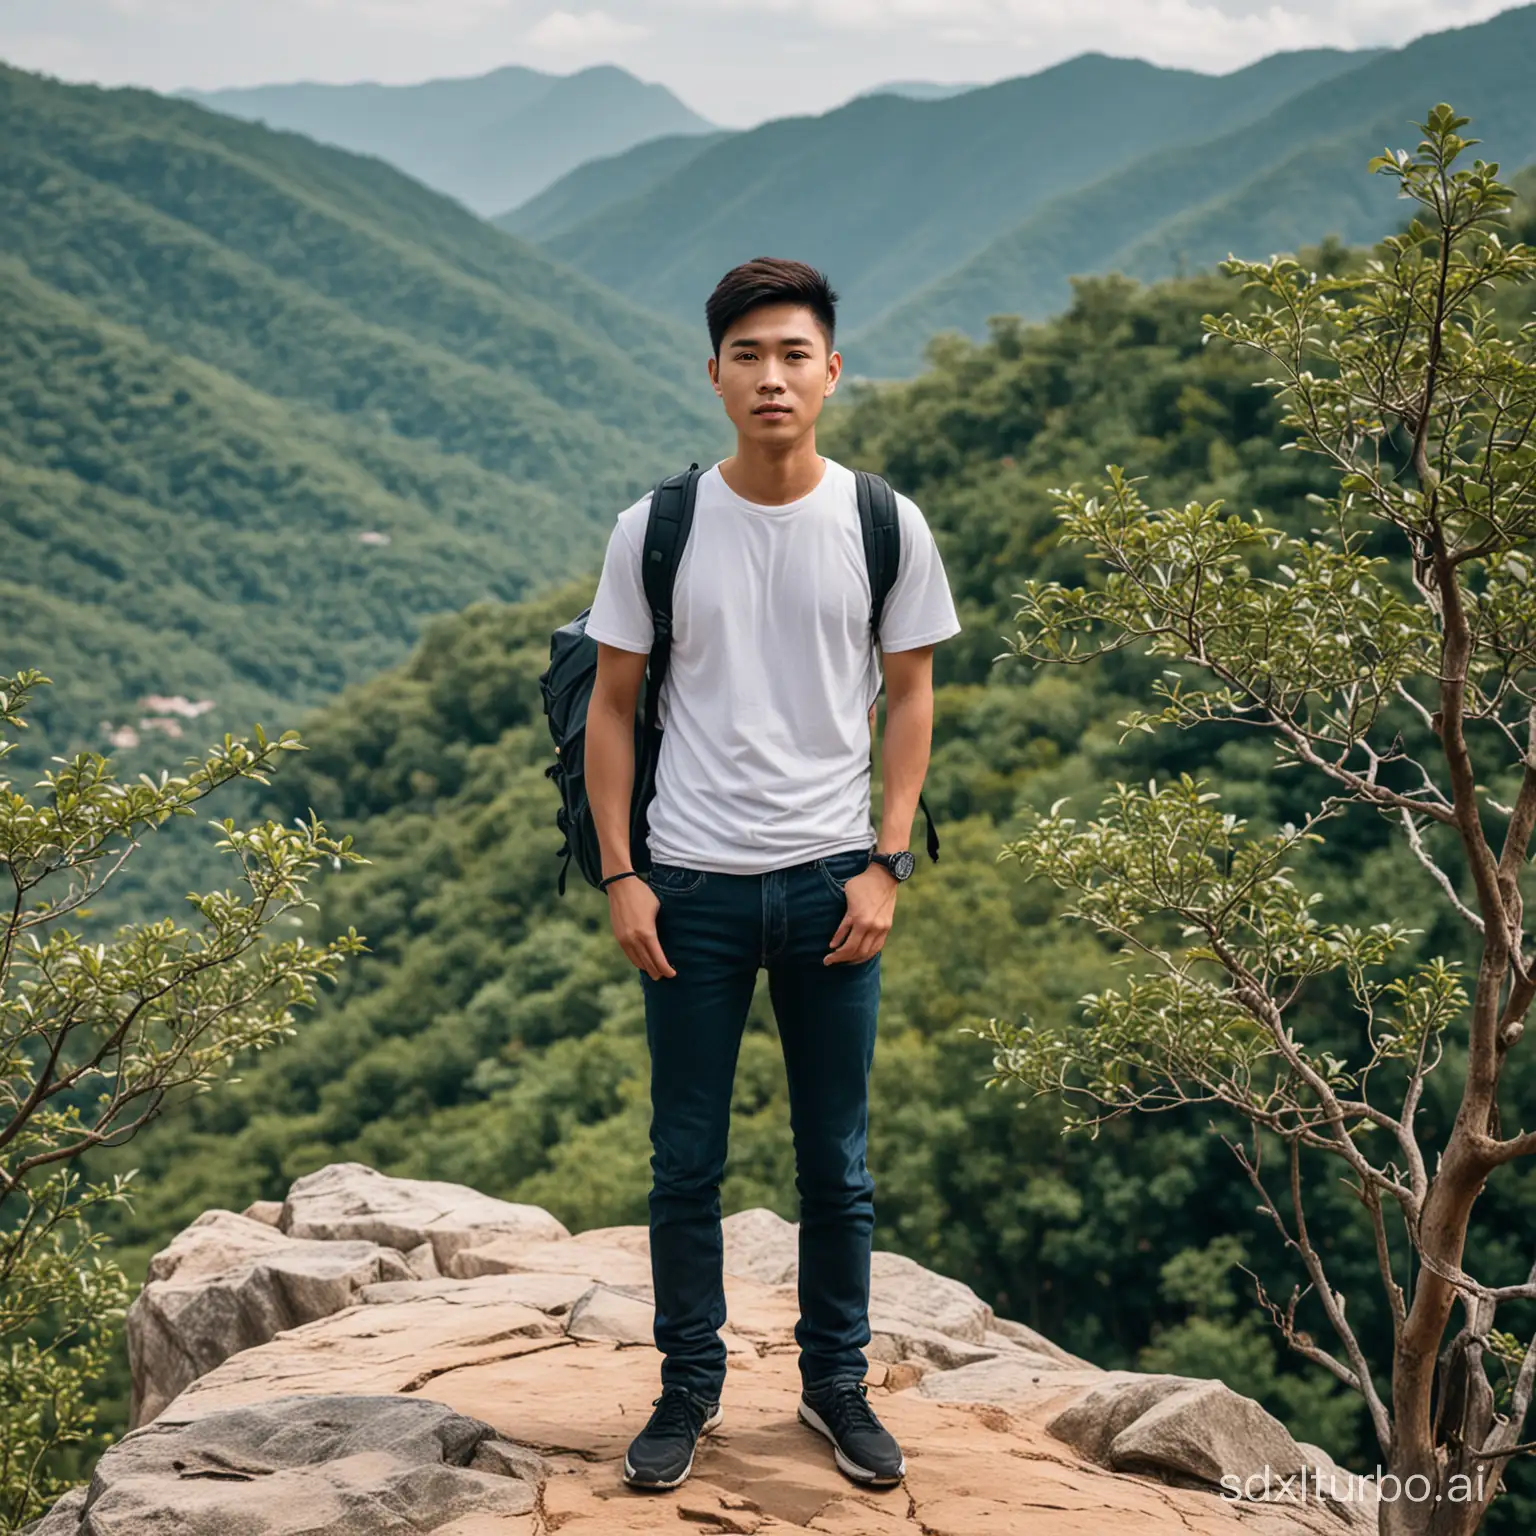 A 25 year old Asian young man, standing on a mountain hill, wearing a T-shirt, jeans, backpack, high cliff, lots of trees